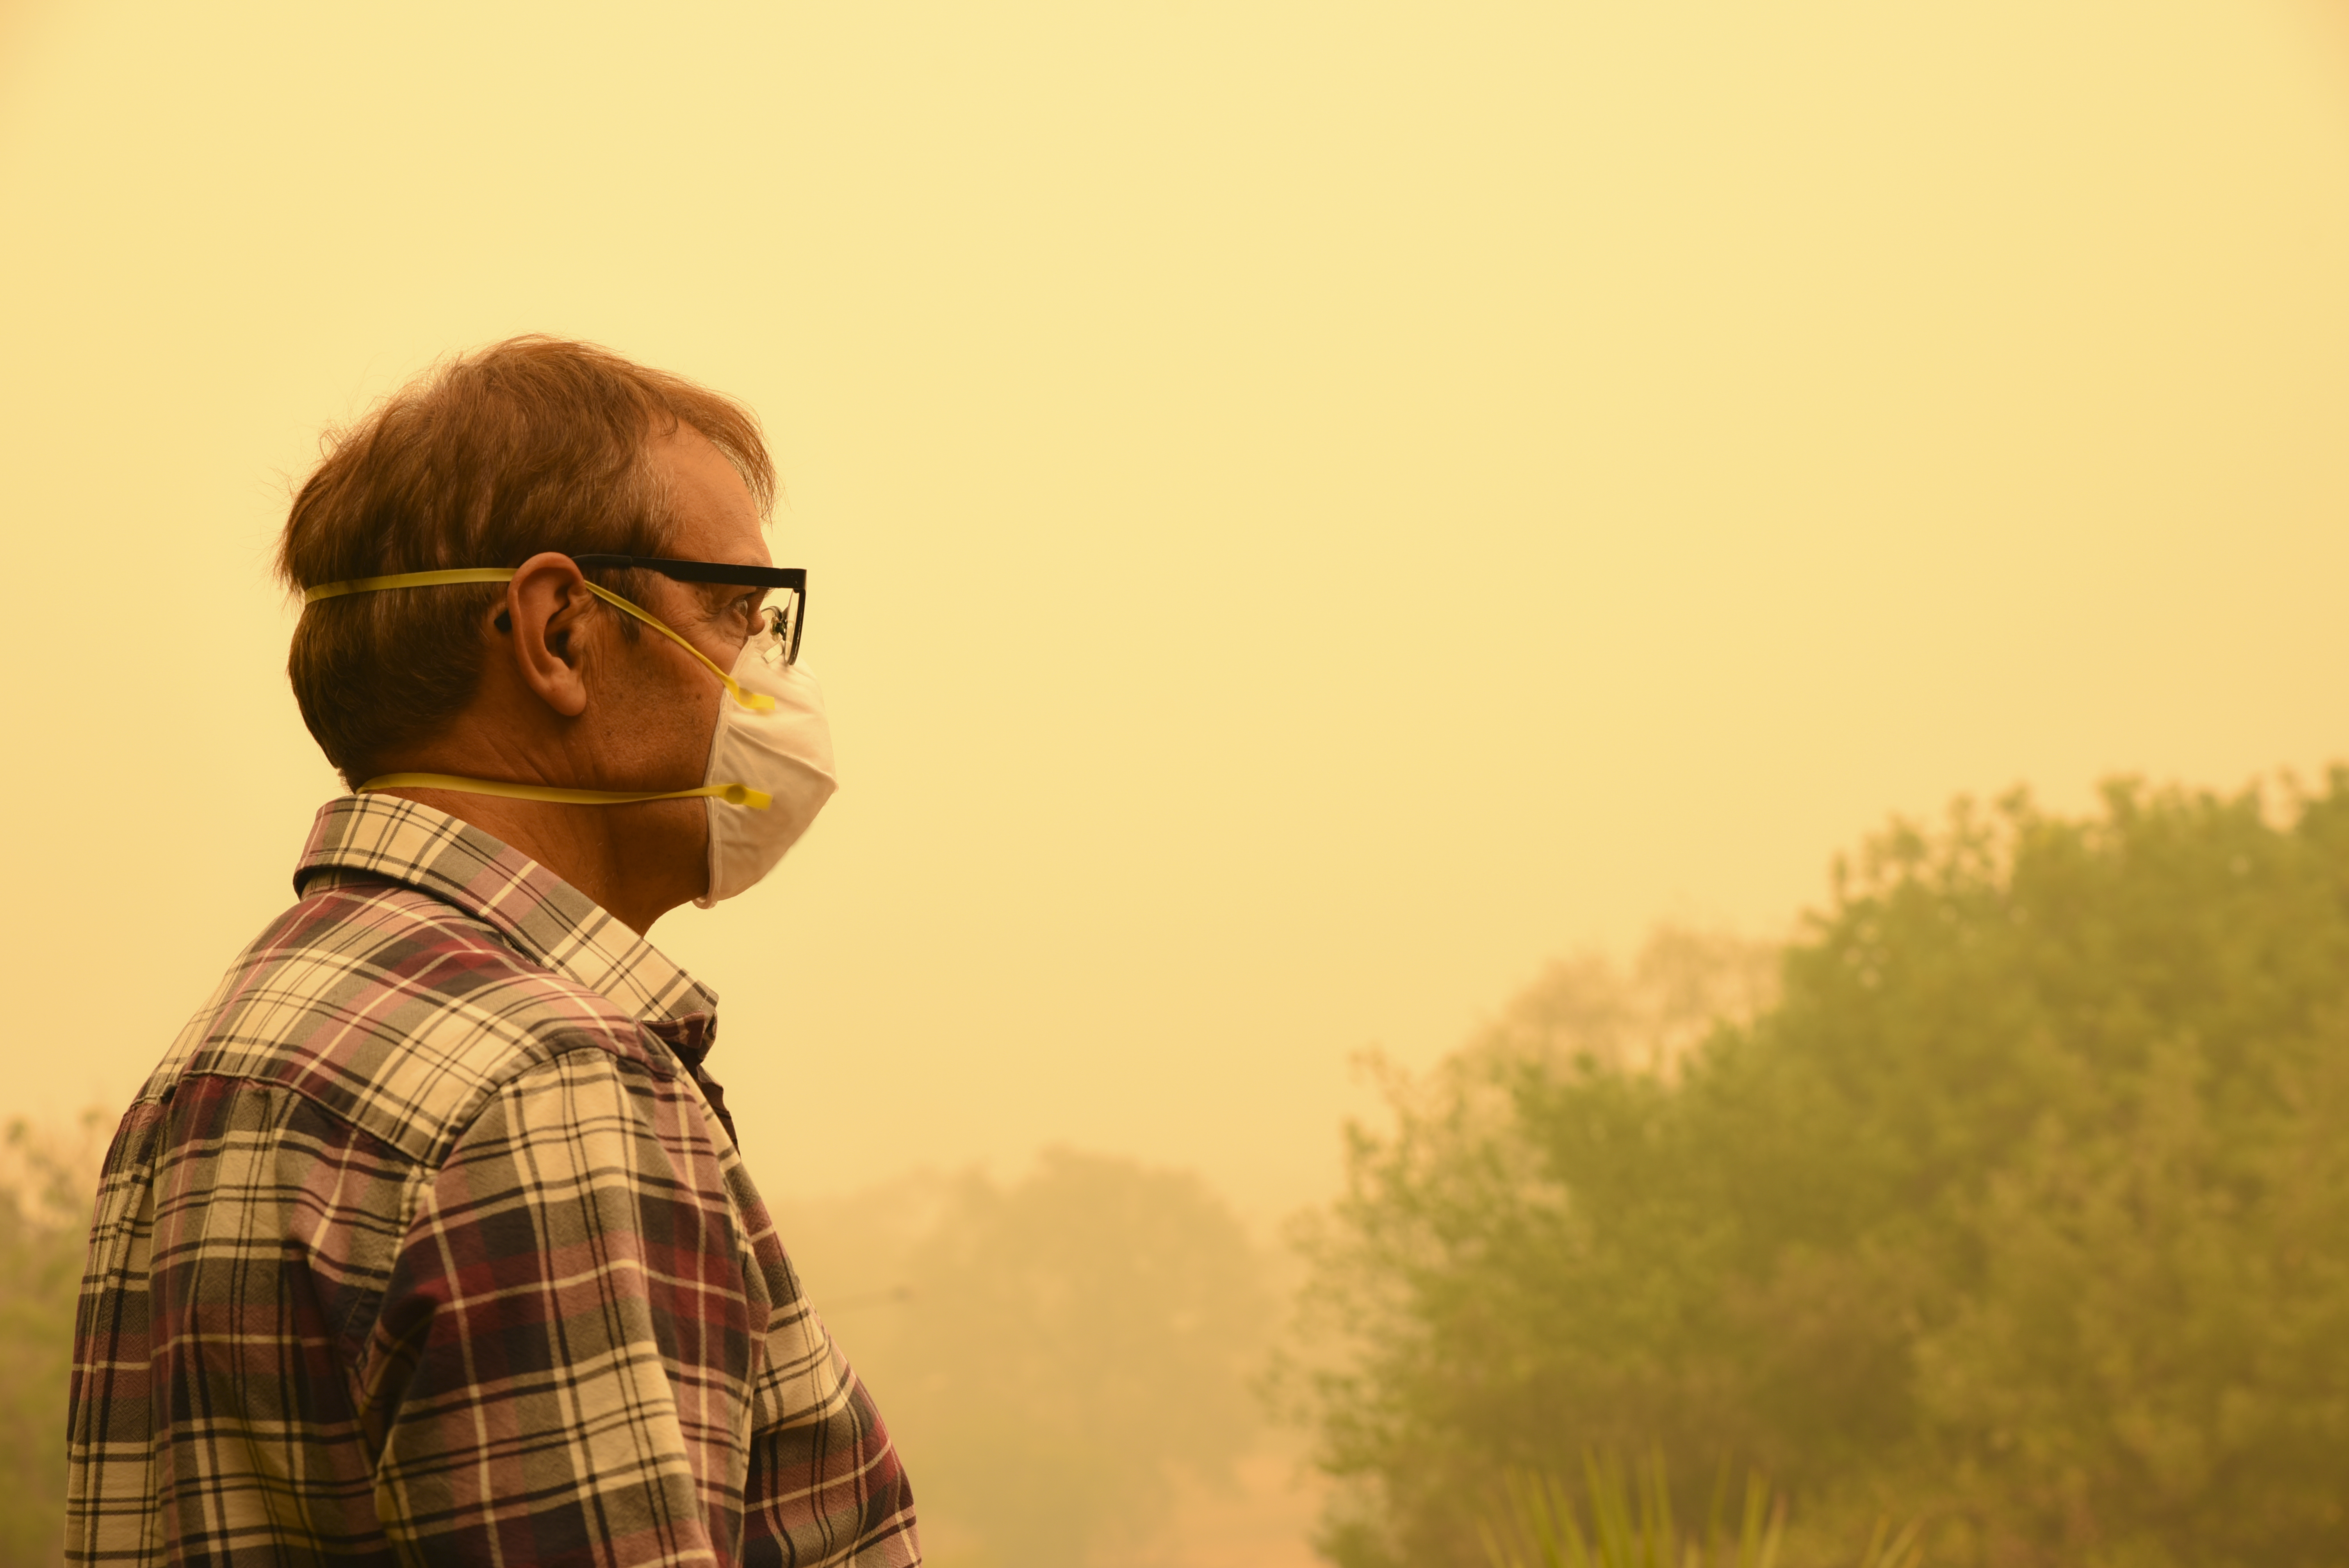 Wildfire Safety: How to Limit Exposure to Smoke and Clean up Ash